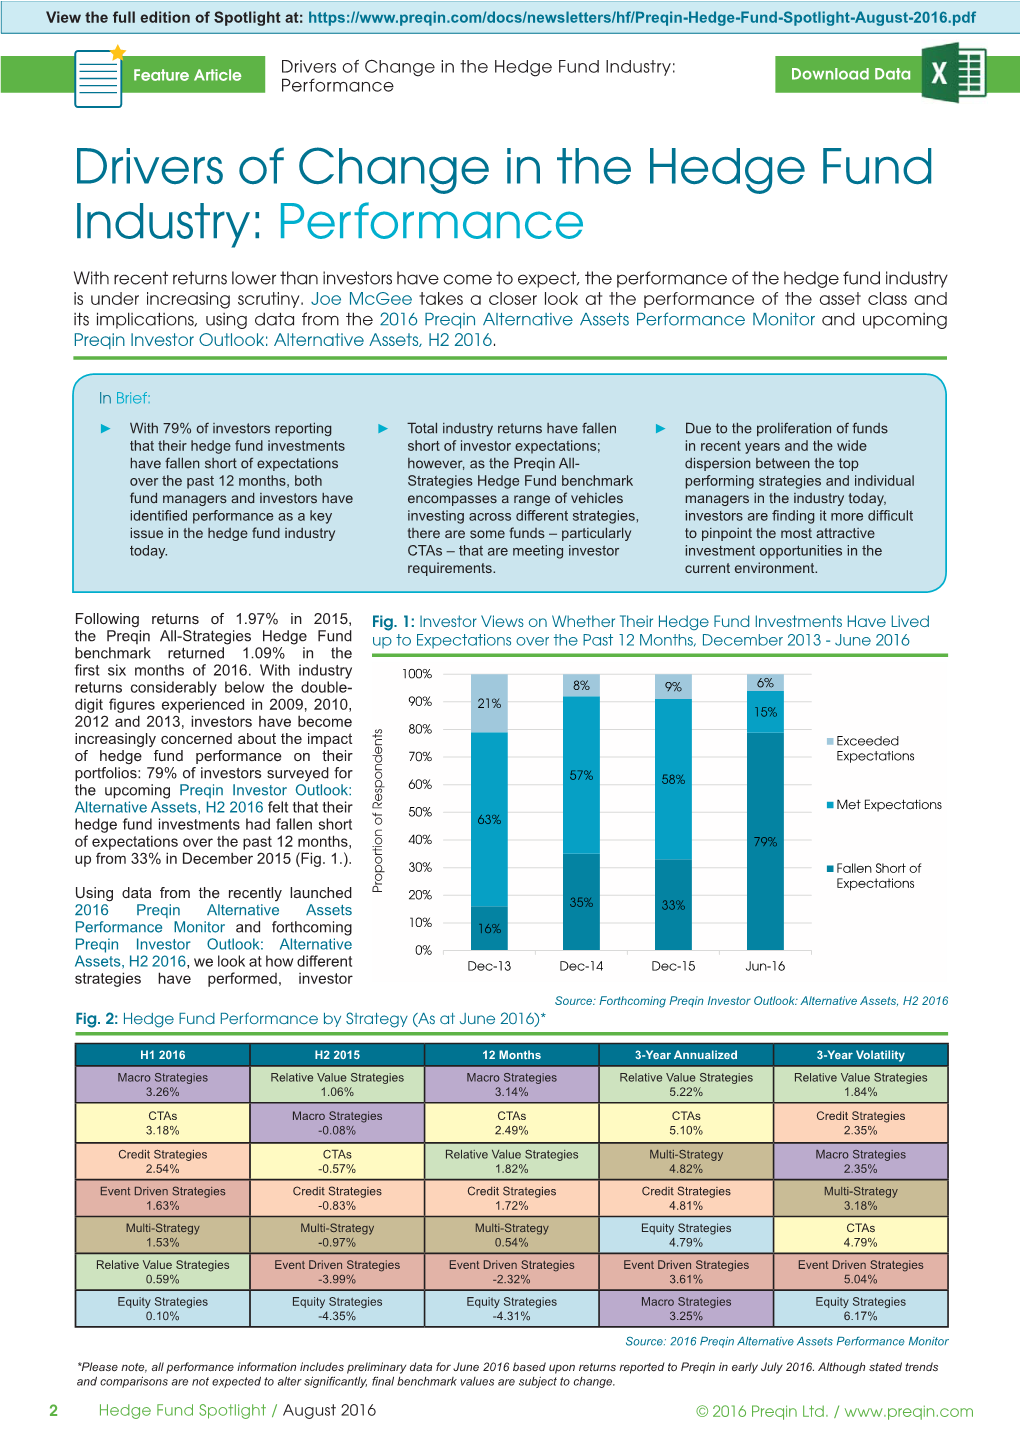 Drivers of Change in the Hedge Fund Industry: Performance